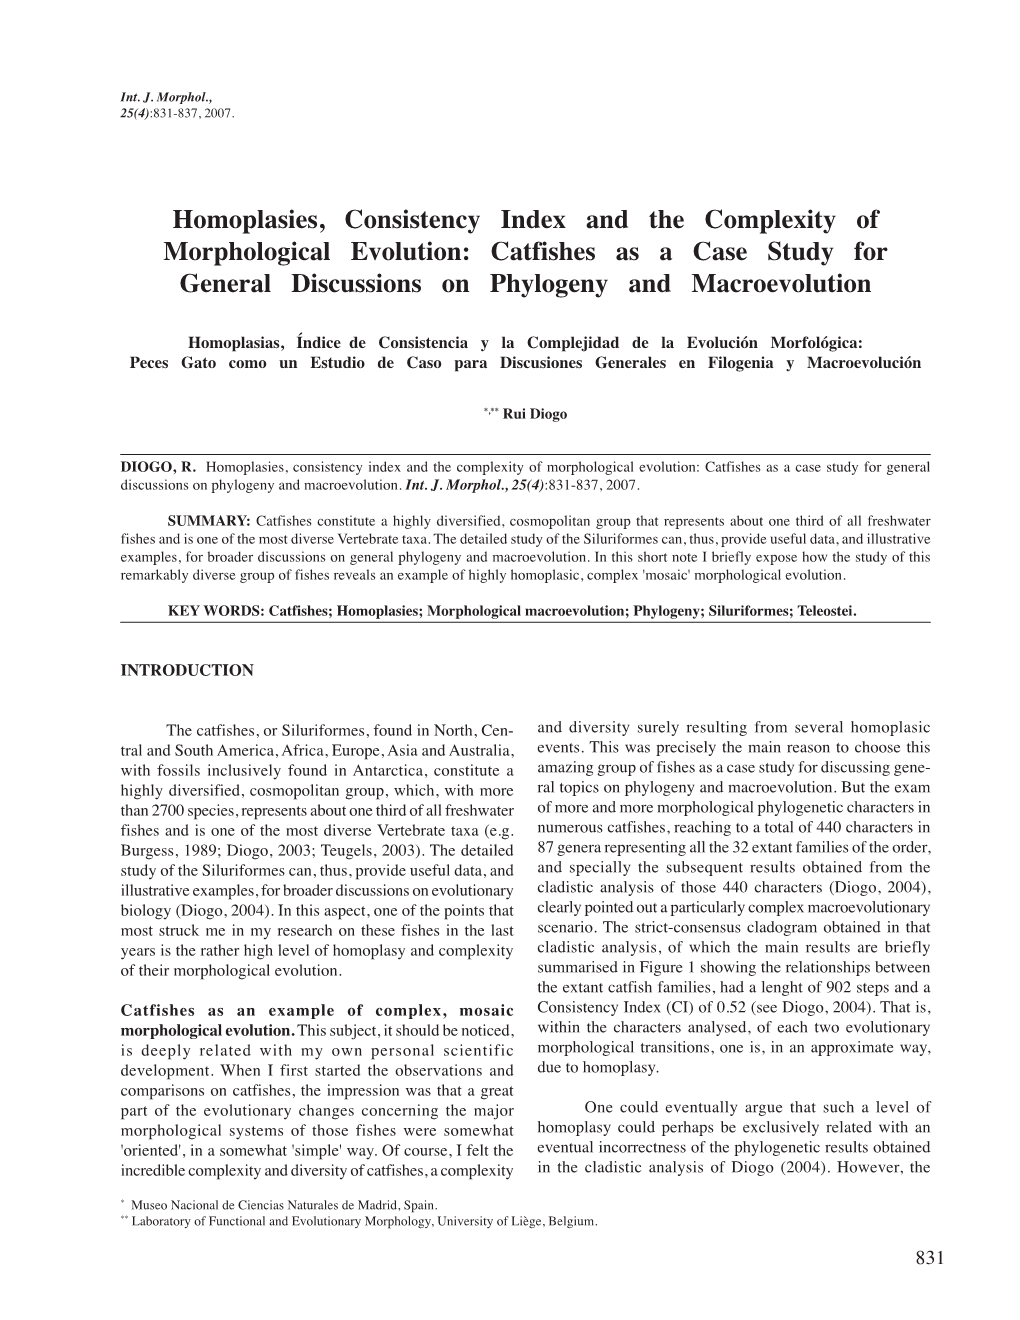 Homoplasies, Consistency Index and the Complexity of Morphological Evolution: Catfishes As a Case Study for General Discussions on Phylogeny and Macroevolution